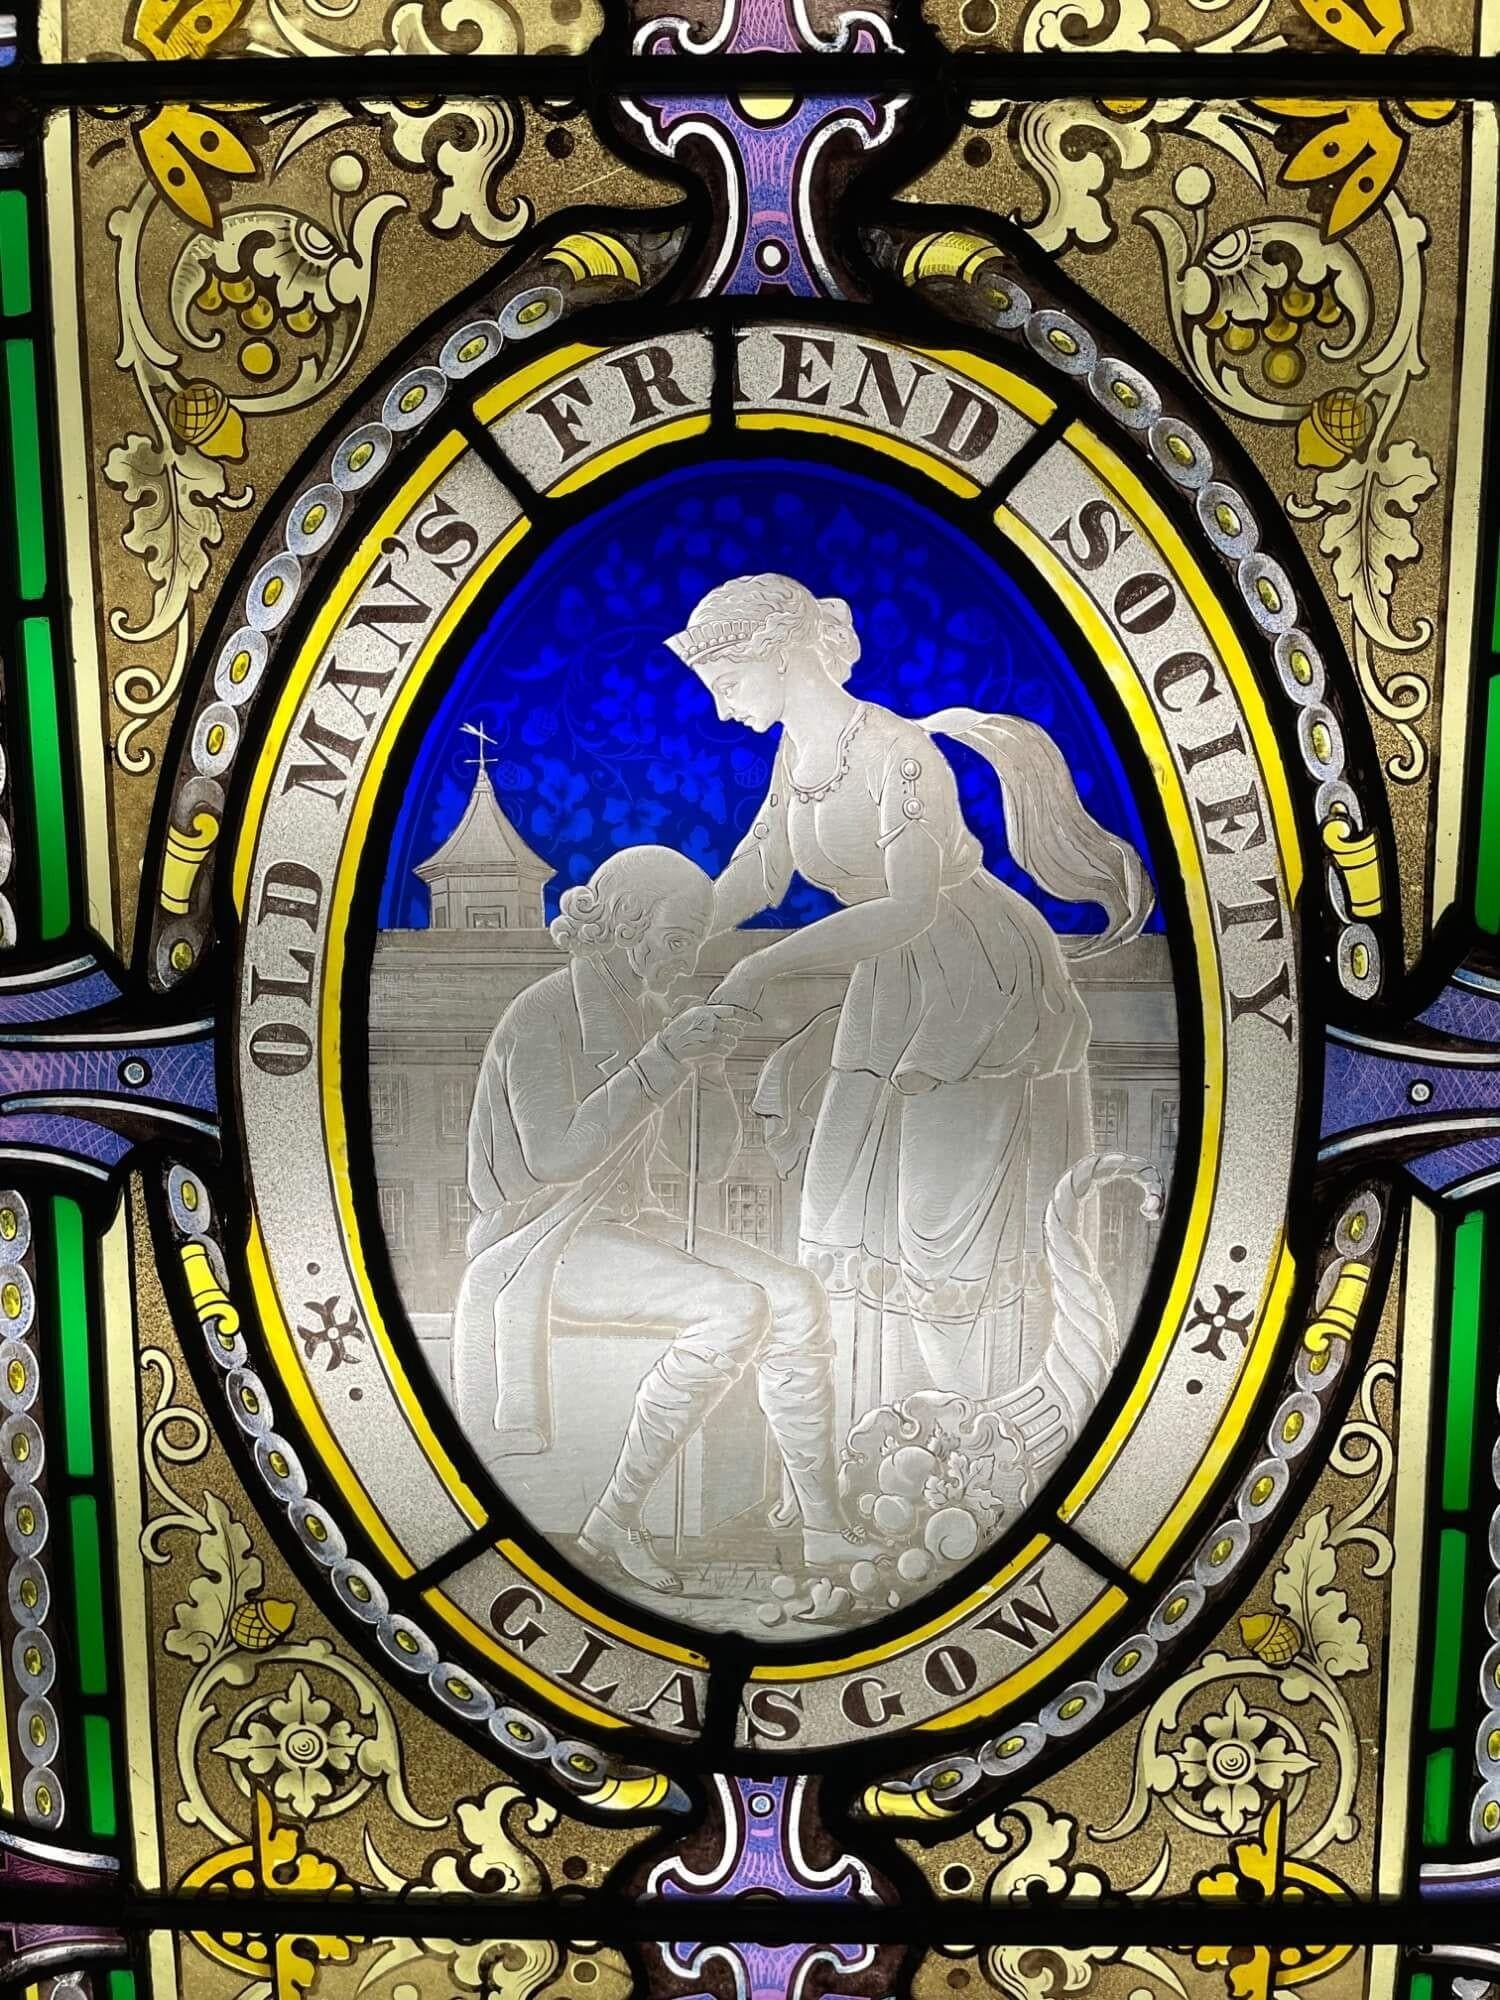 An impressive Victorian stained glass window by Adam & Small of Glasgow made in circa 1895 to commemorate the opening of the Old Man's Friend Society in Rottenrow Balmanno House in 1845. This large and vibrant piece is intricately decorated,